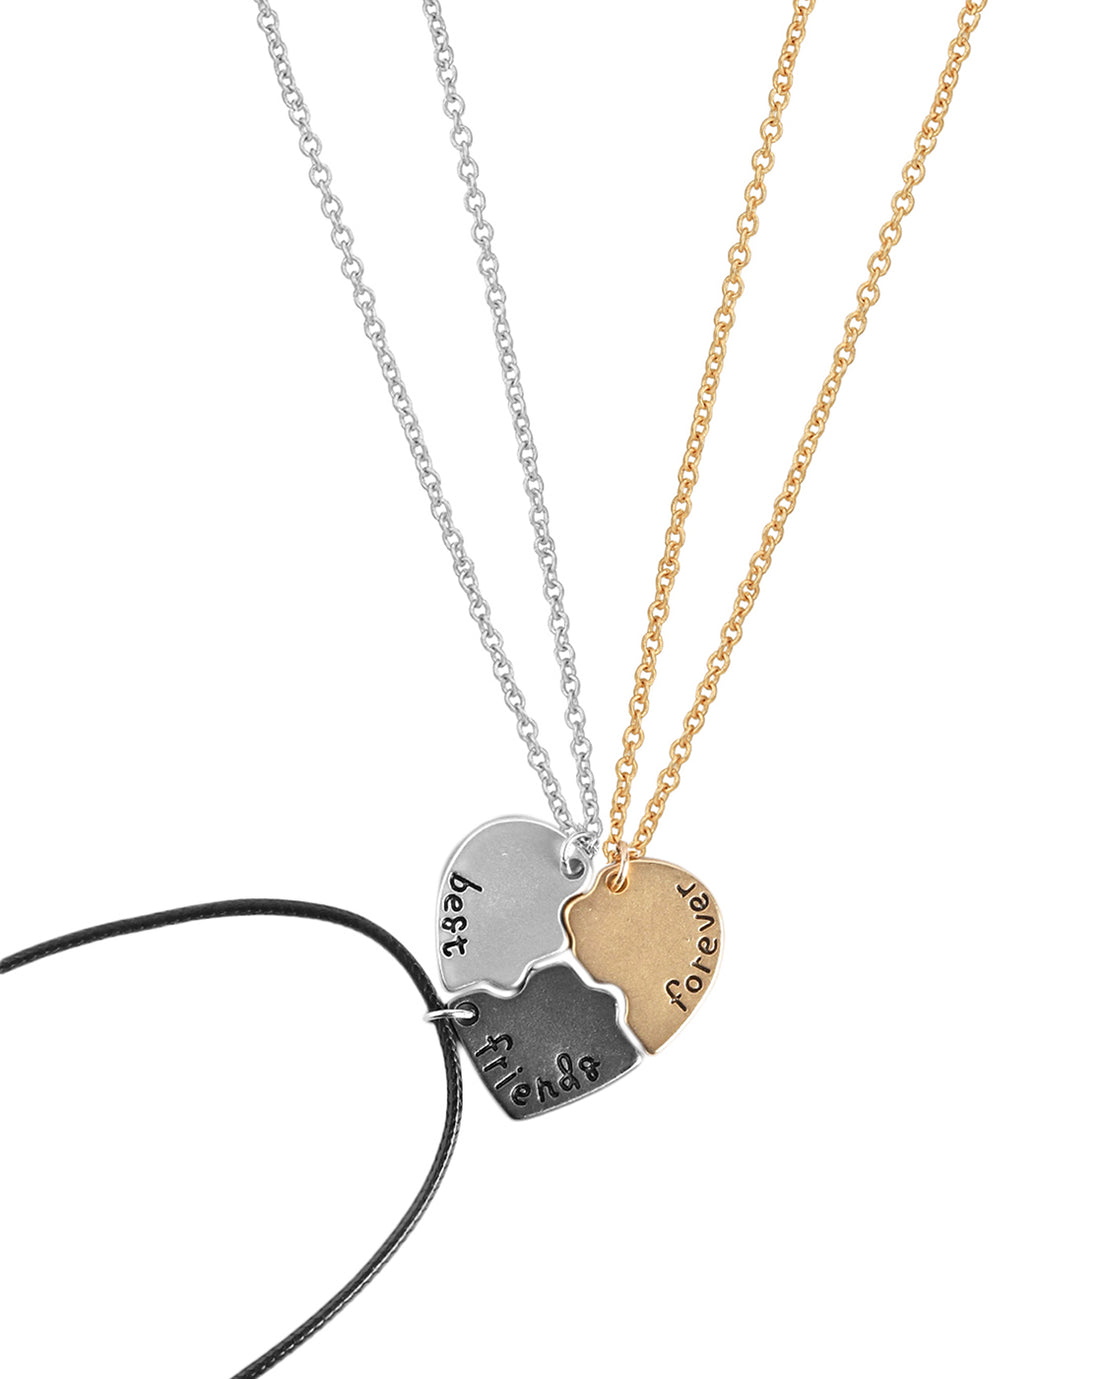 Set of 3 Silver &amp; Rose Gold Plated Best Friend Forever Heart Pendant with chain for friends